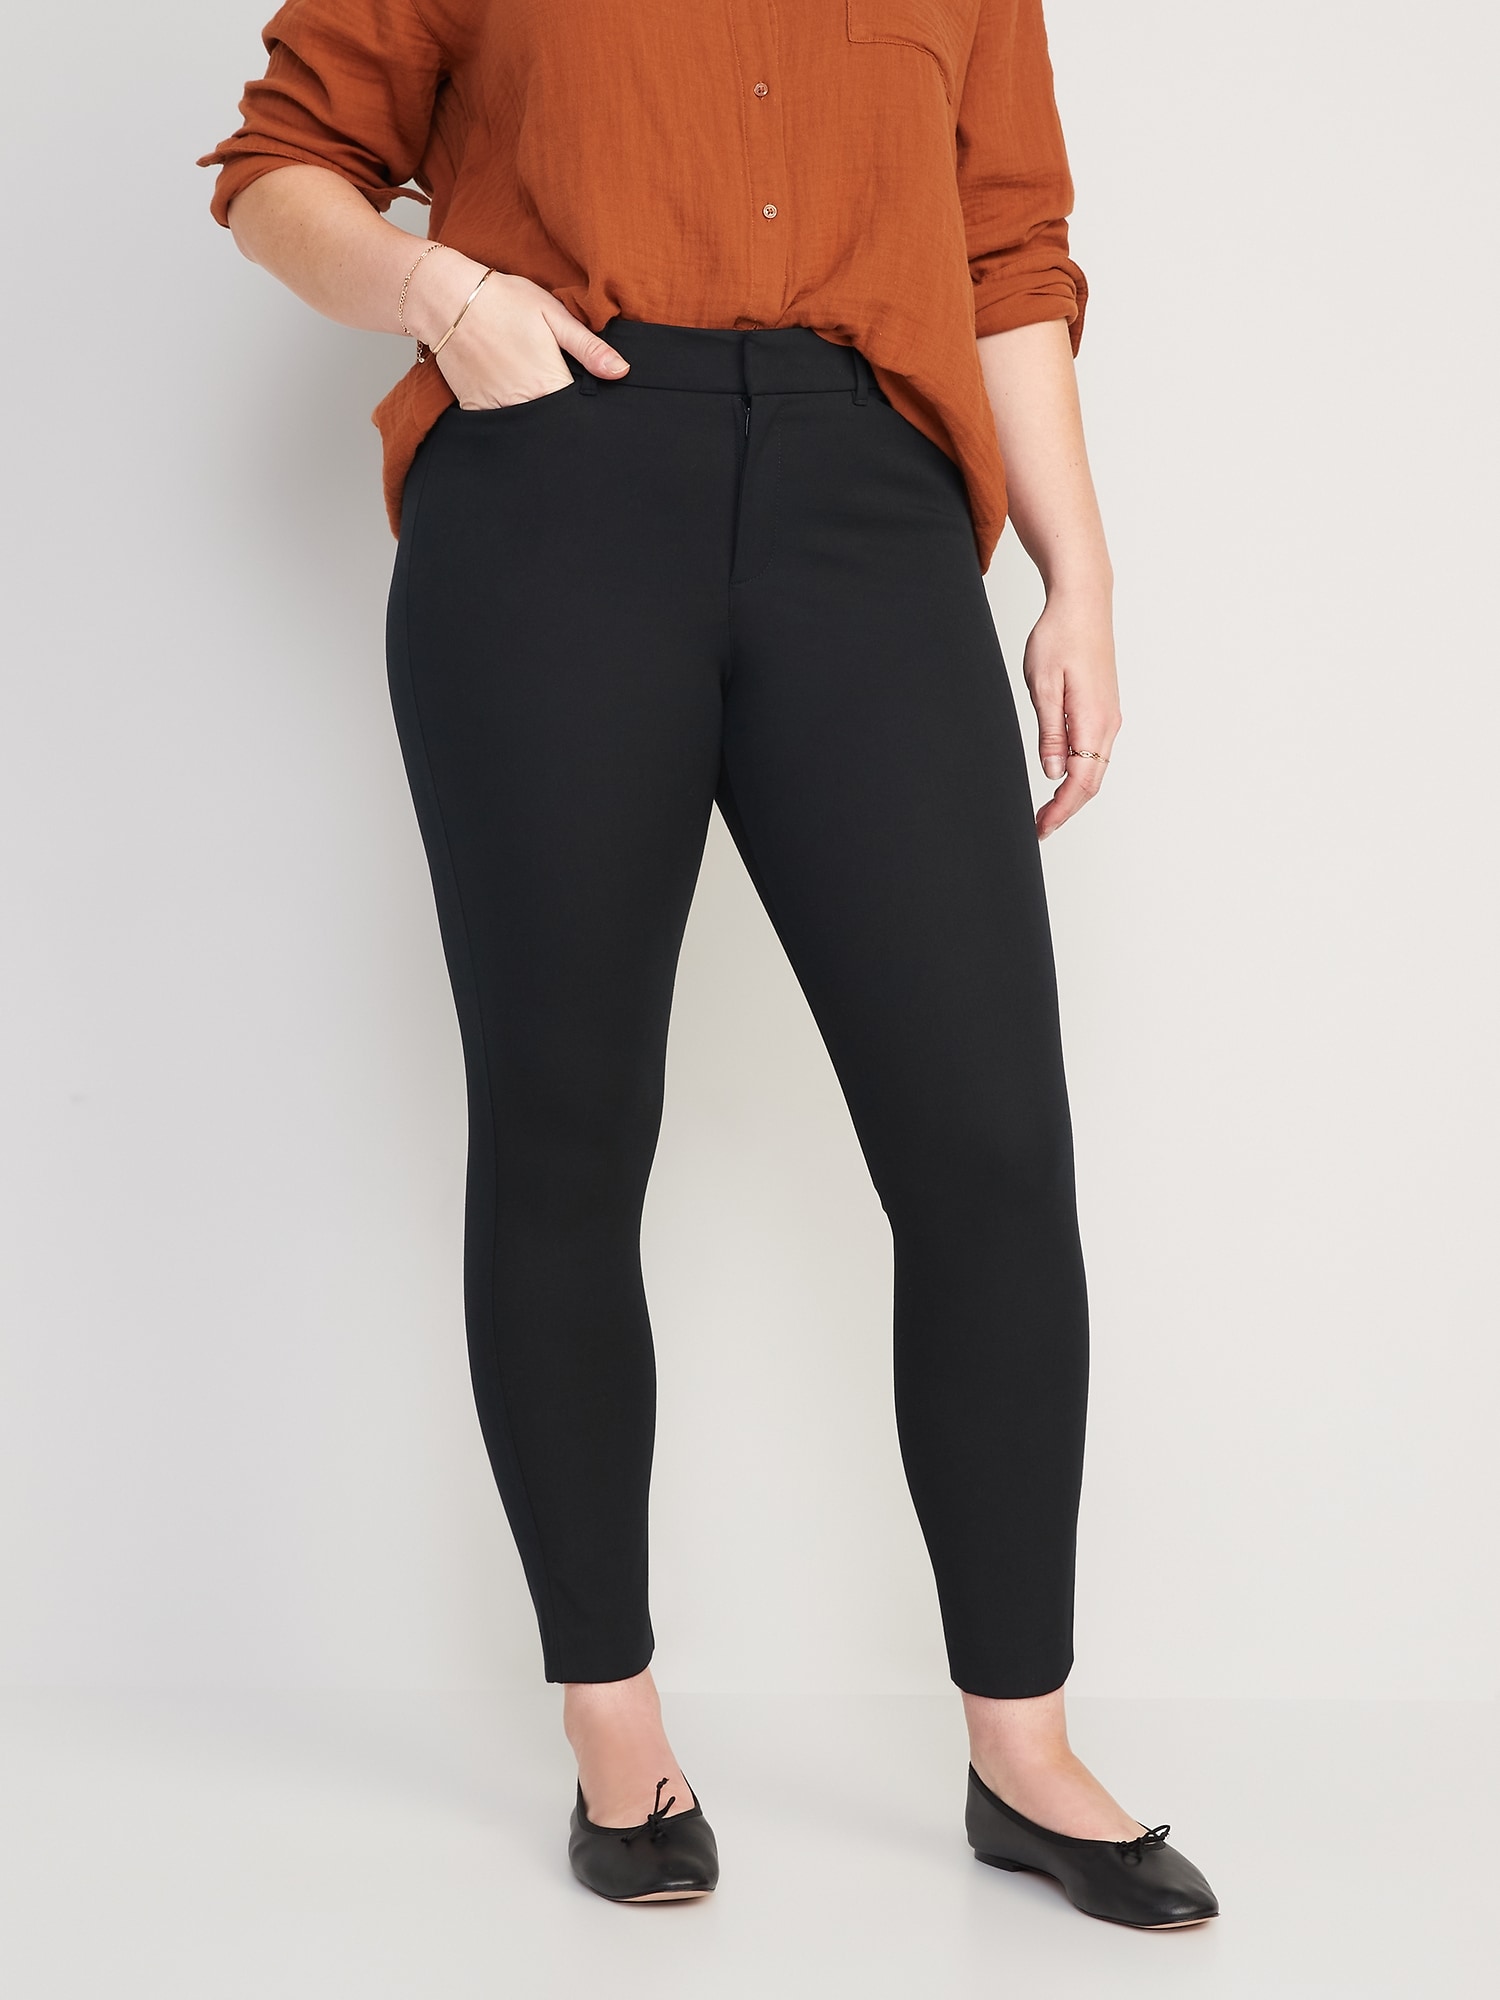 Old Navy Extra HighWaisted Pleated Taylor WideLeg Trouser Suit Pants for  Women  Yorkdale Mall